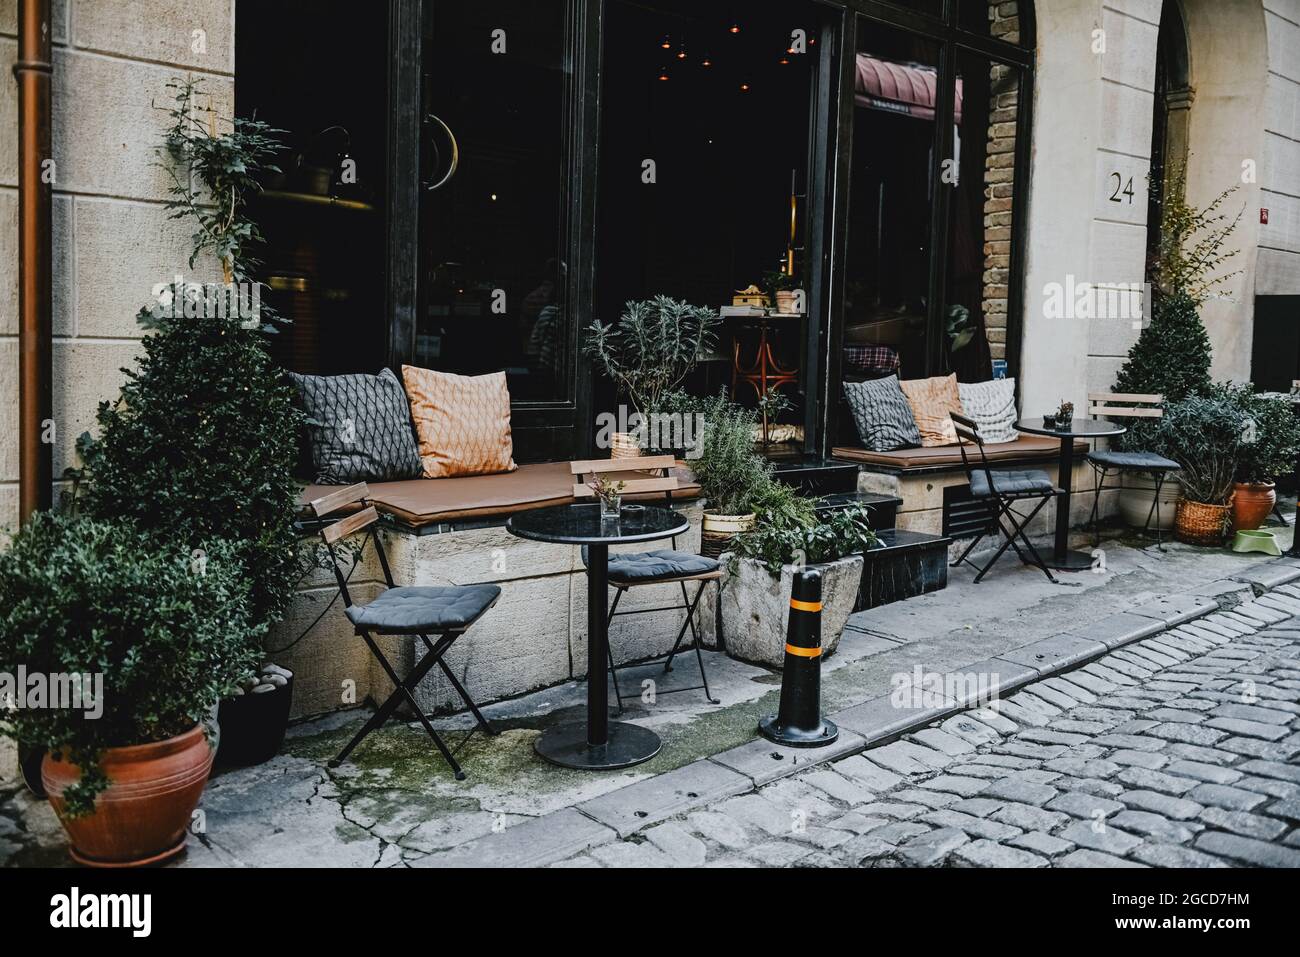 street cafe Old Streets Europe. Foto Stock